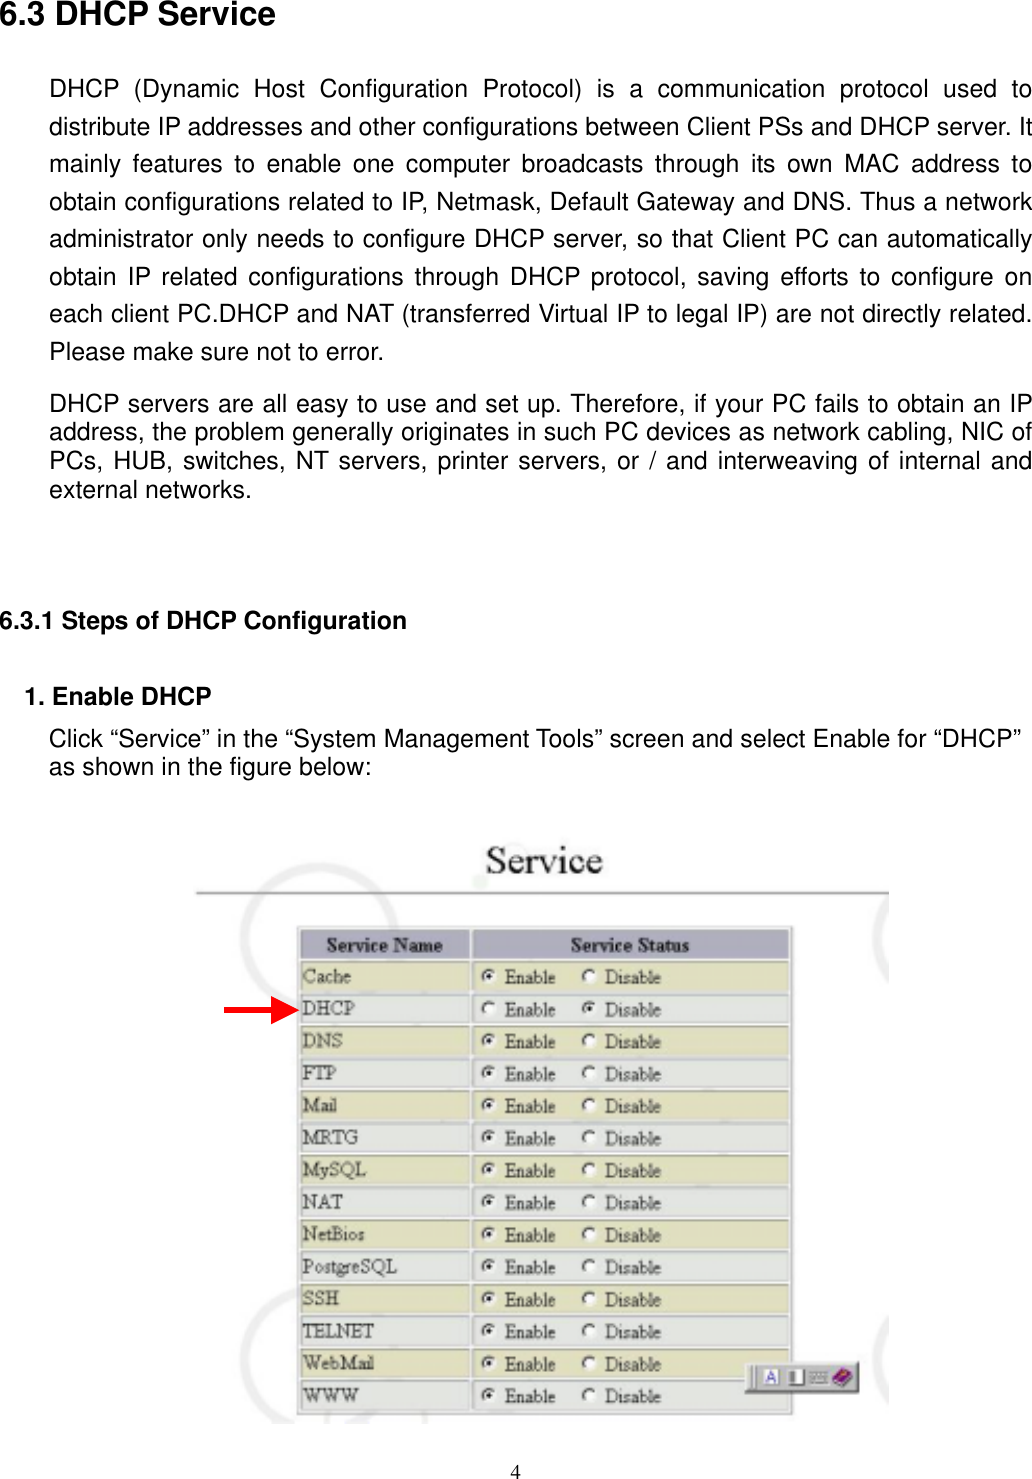  4 6.3 DHCP Service DHCP (Dynamic Host Configuration Protocol) is a communication protocol used to distribute IP addresses and other configurations between Client PSs and DHCP server. It mainly features to enable one computer broadcasts through its own MAC address to obtain configurations related to IP, Netmask, Default Gateway and DNS. Thus a network administrator only needs to configure DHCP server, so that Client PC can automatically obtain IP related configurations through DHCP protocol, saving efforts to configure on each client PC.DHCP and NAT (transferred Virtual IP to legal IP) are not directly related. Please make sure not to error. DHCP servers are all easy to use and set up. Therefore, if your PC fails to obtain an IP address, the problem generally originates in such PC devices as network cabling, NIC of PCs, HUB, switches, NT servers, printer servers, or / and interweaving of internal and external networks.    6.3.1 Steps of DHCP Configuration   1. Enable DHCP Click “Service” in the “System Management Tools” screen and select Enable for “DHCP” as shown in the figure below:    